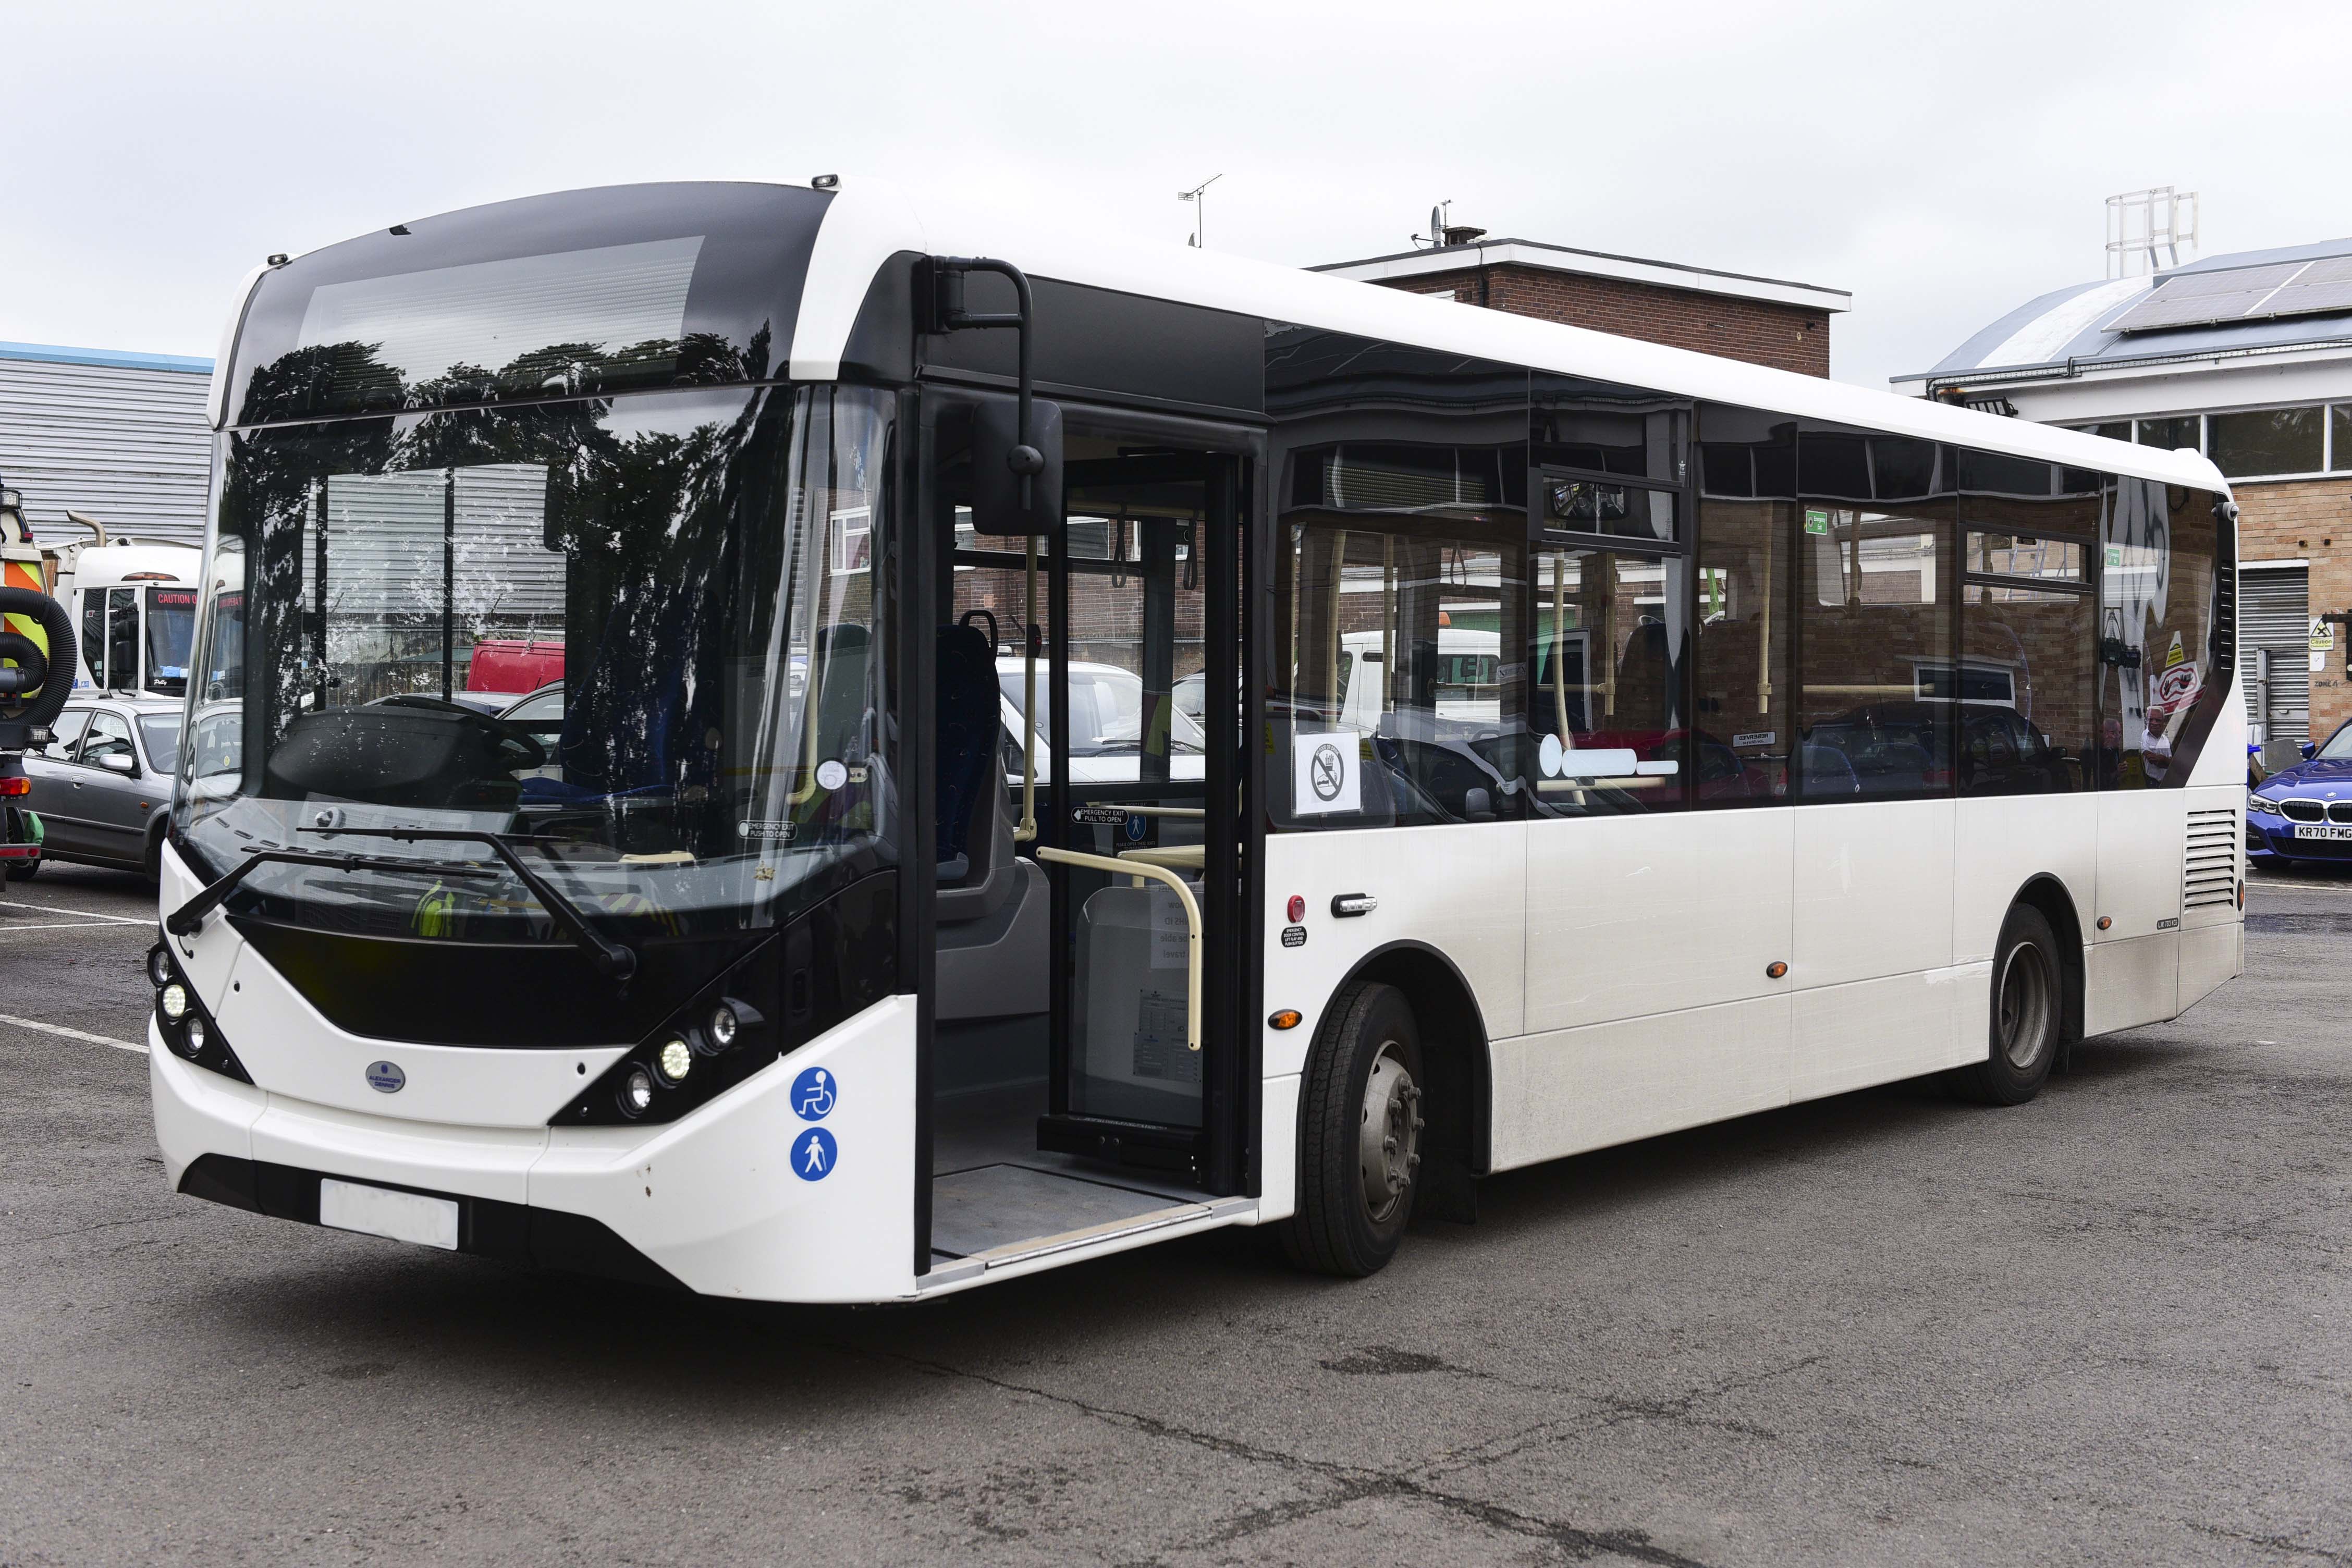 SFS supplies Smart low-carbon buses to NHS